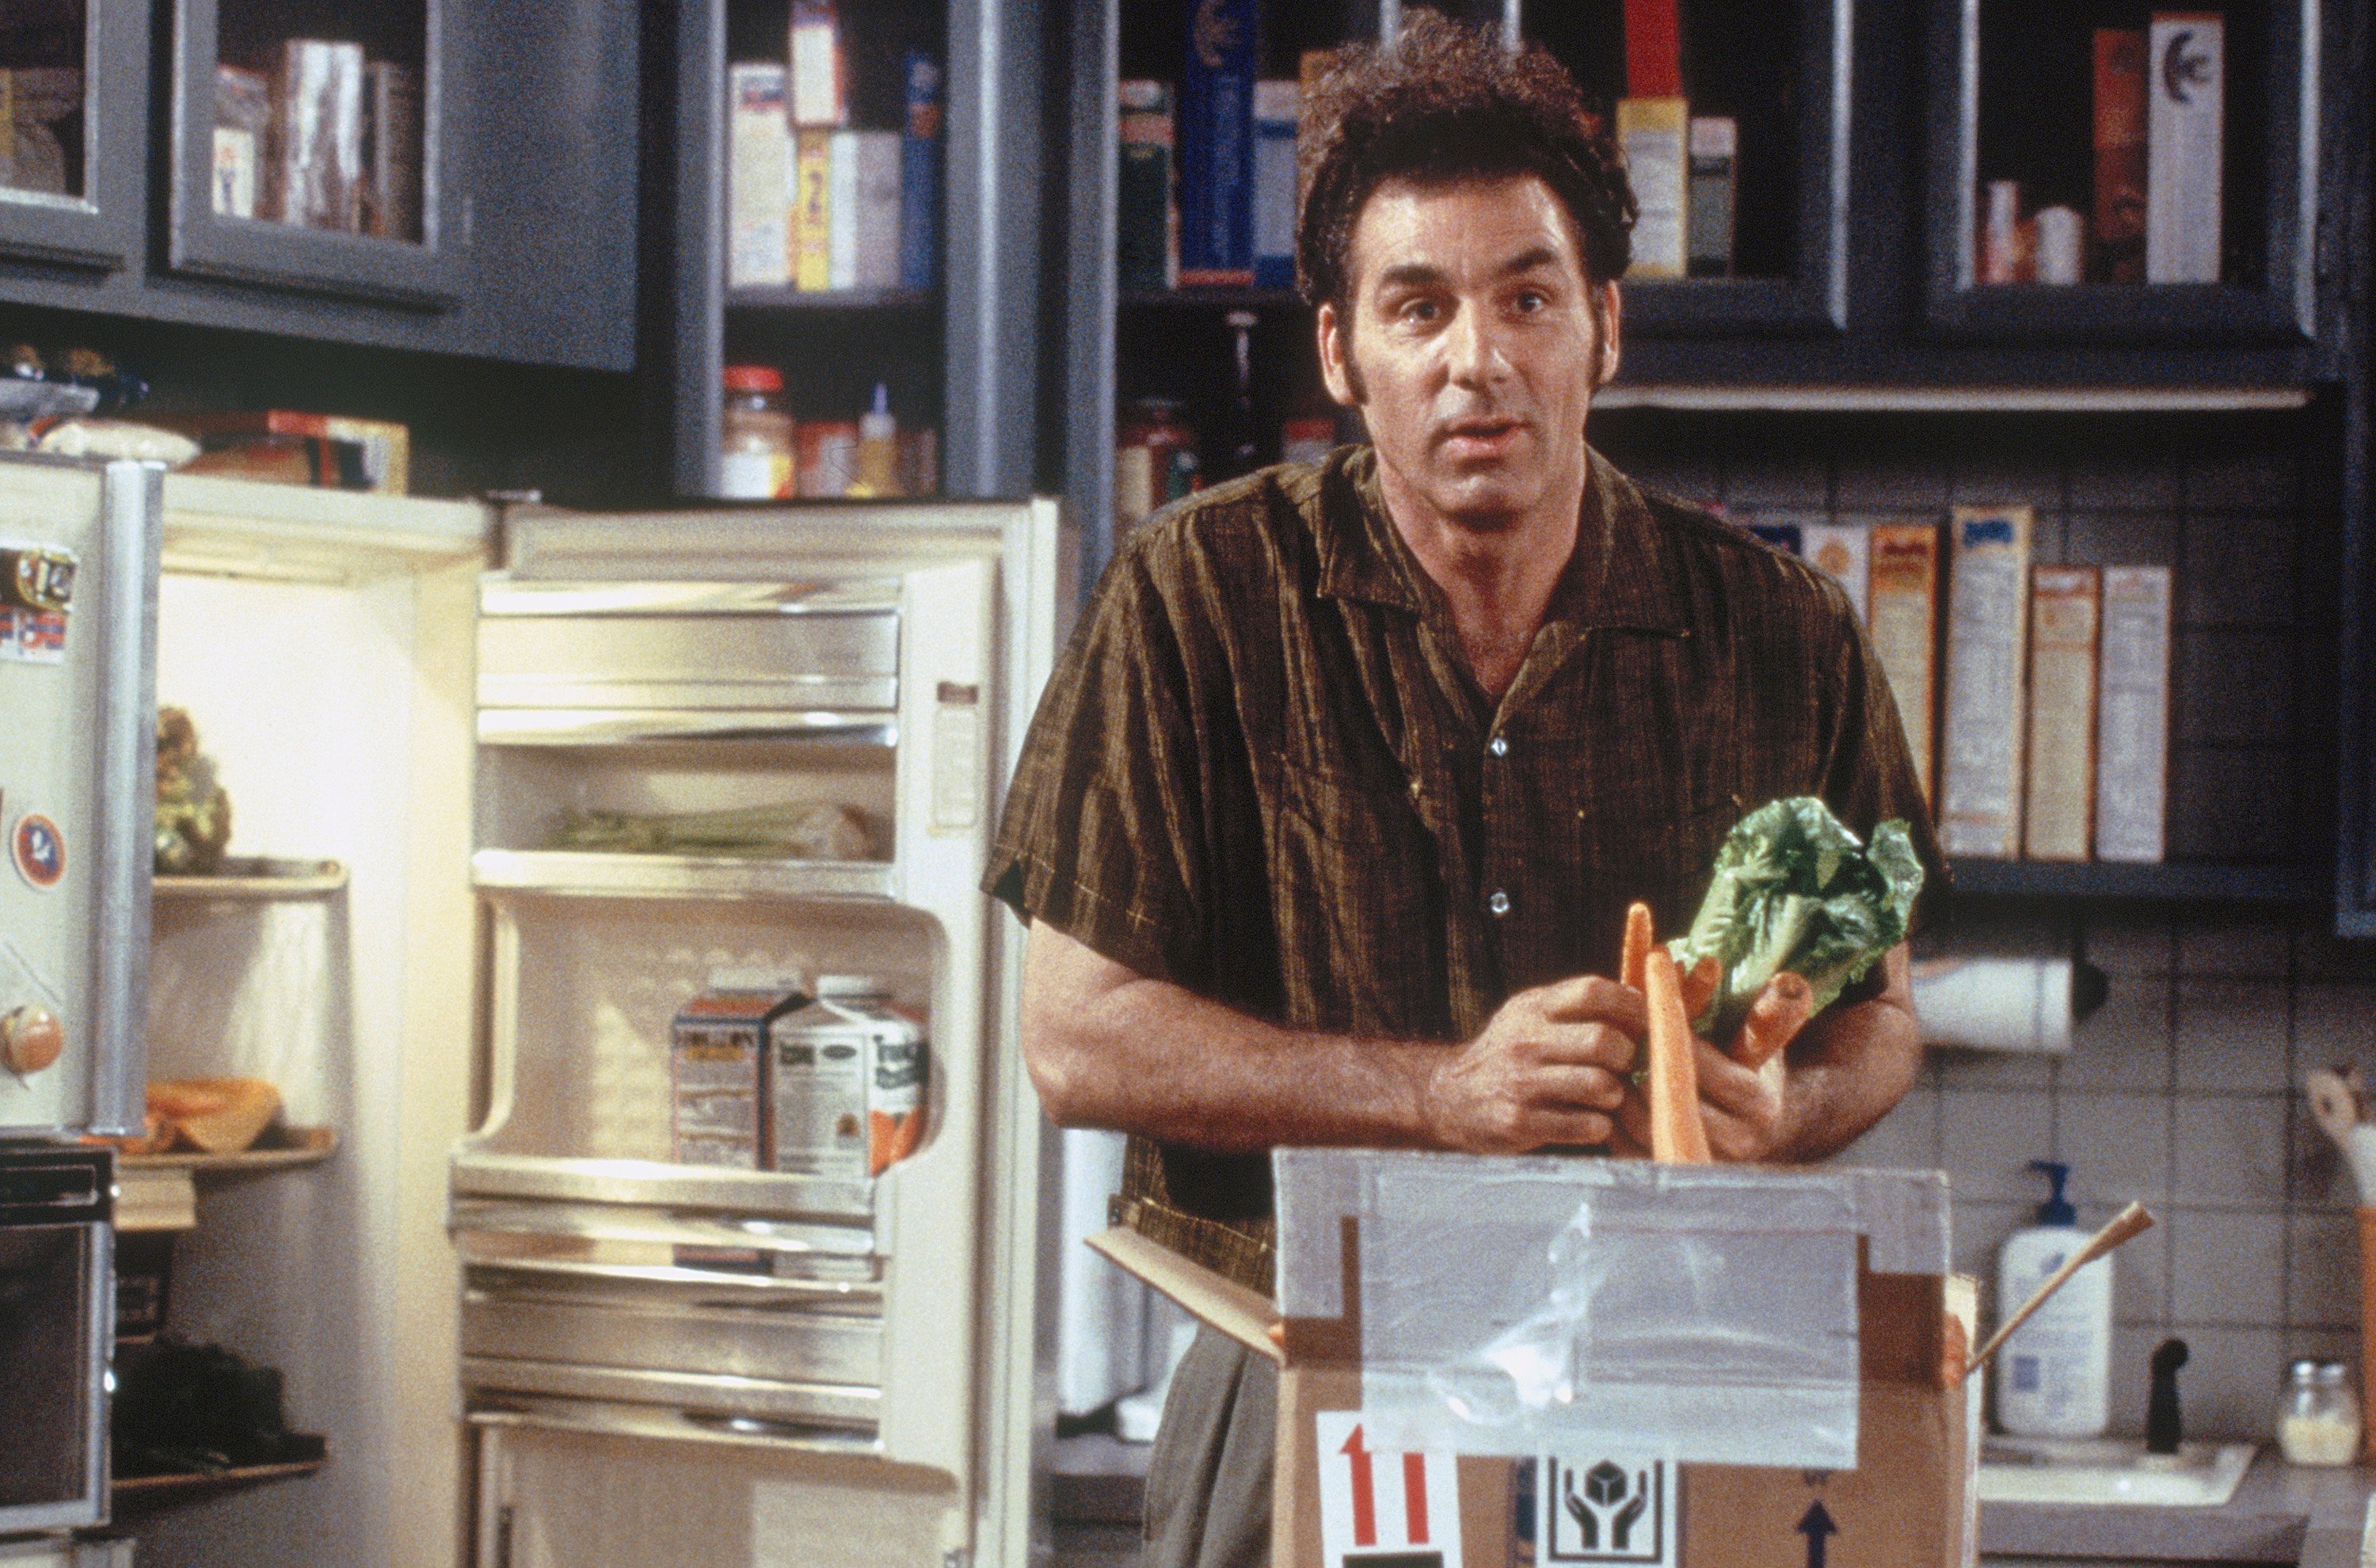 Cosmo Kramer stands in Jerry's kitchen during an episode of 'Seinfeld'